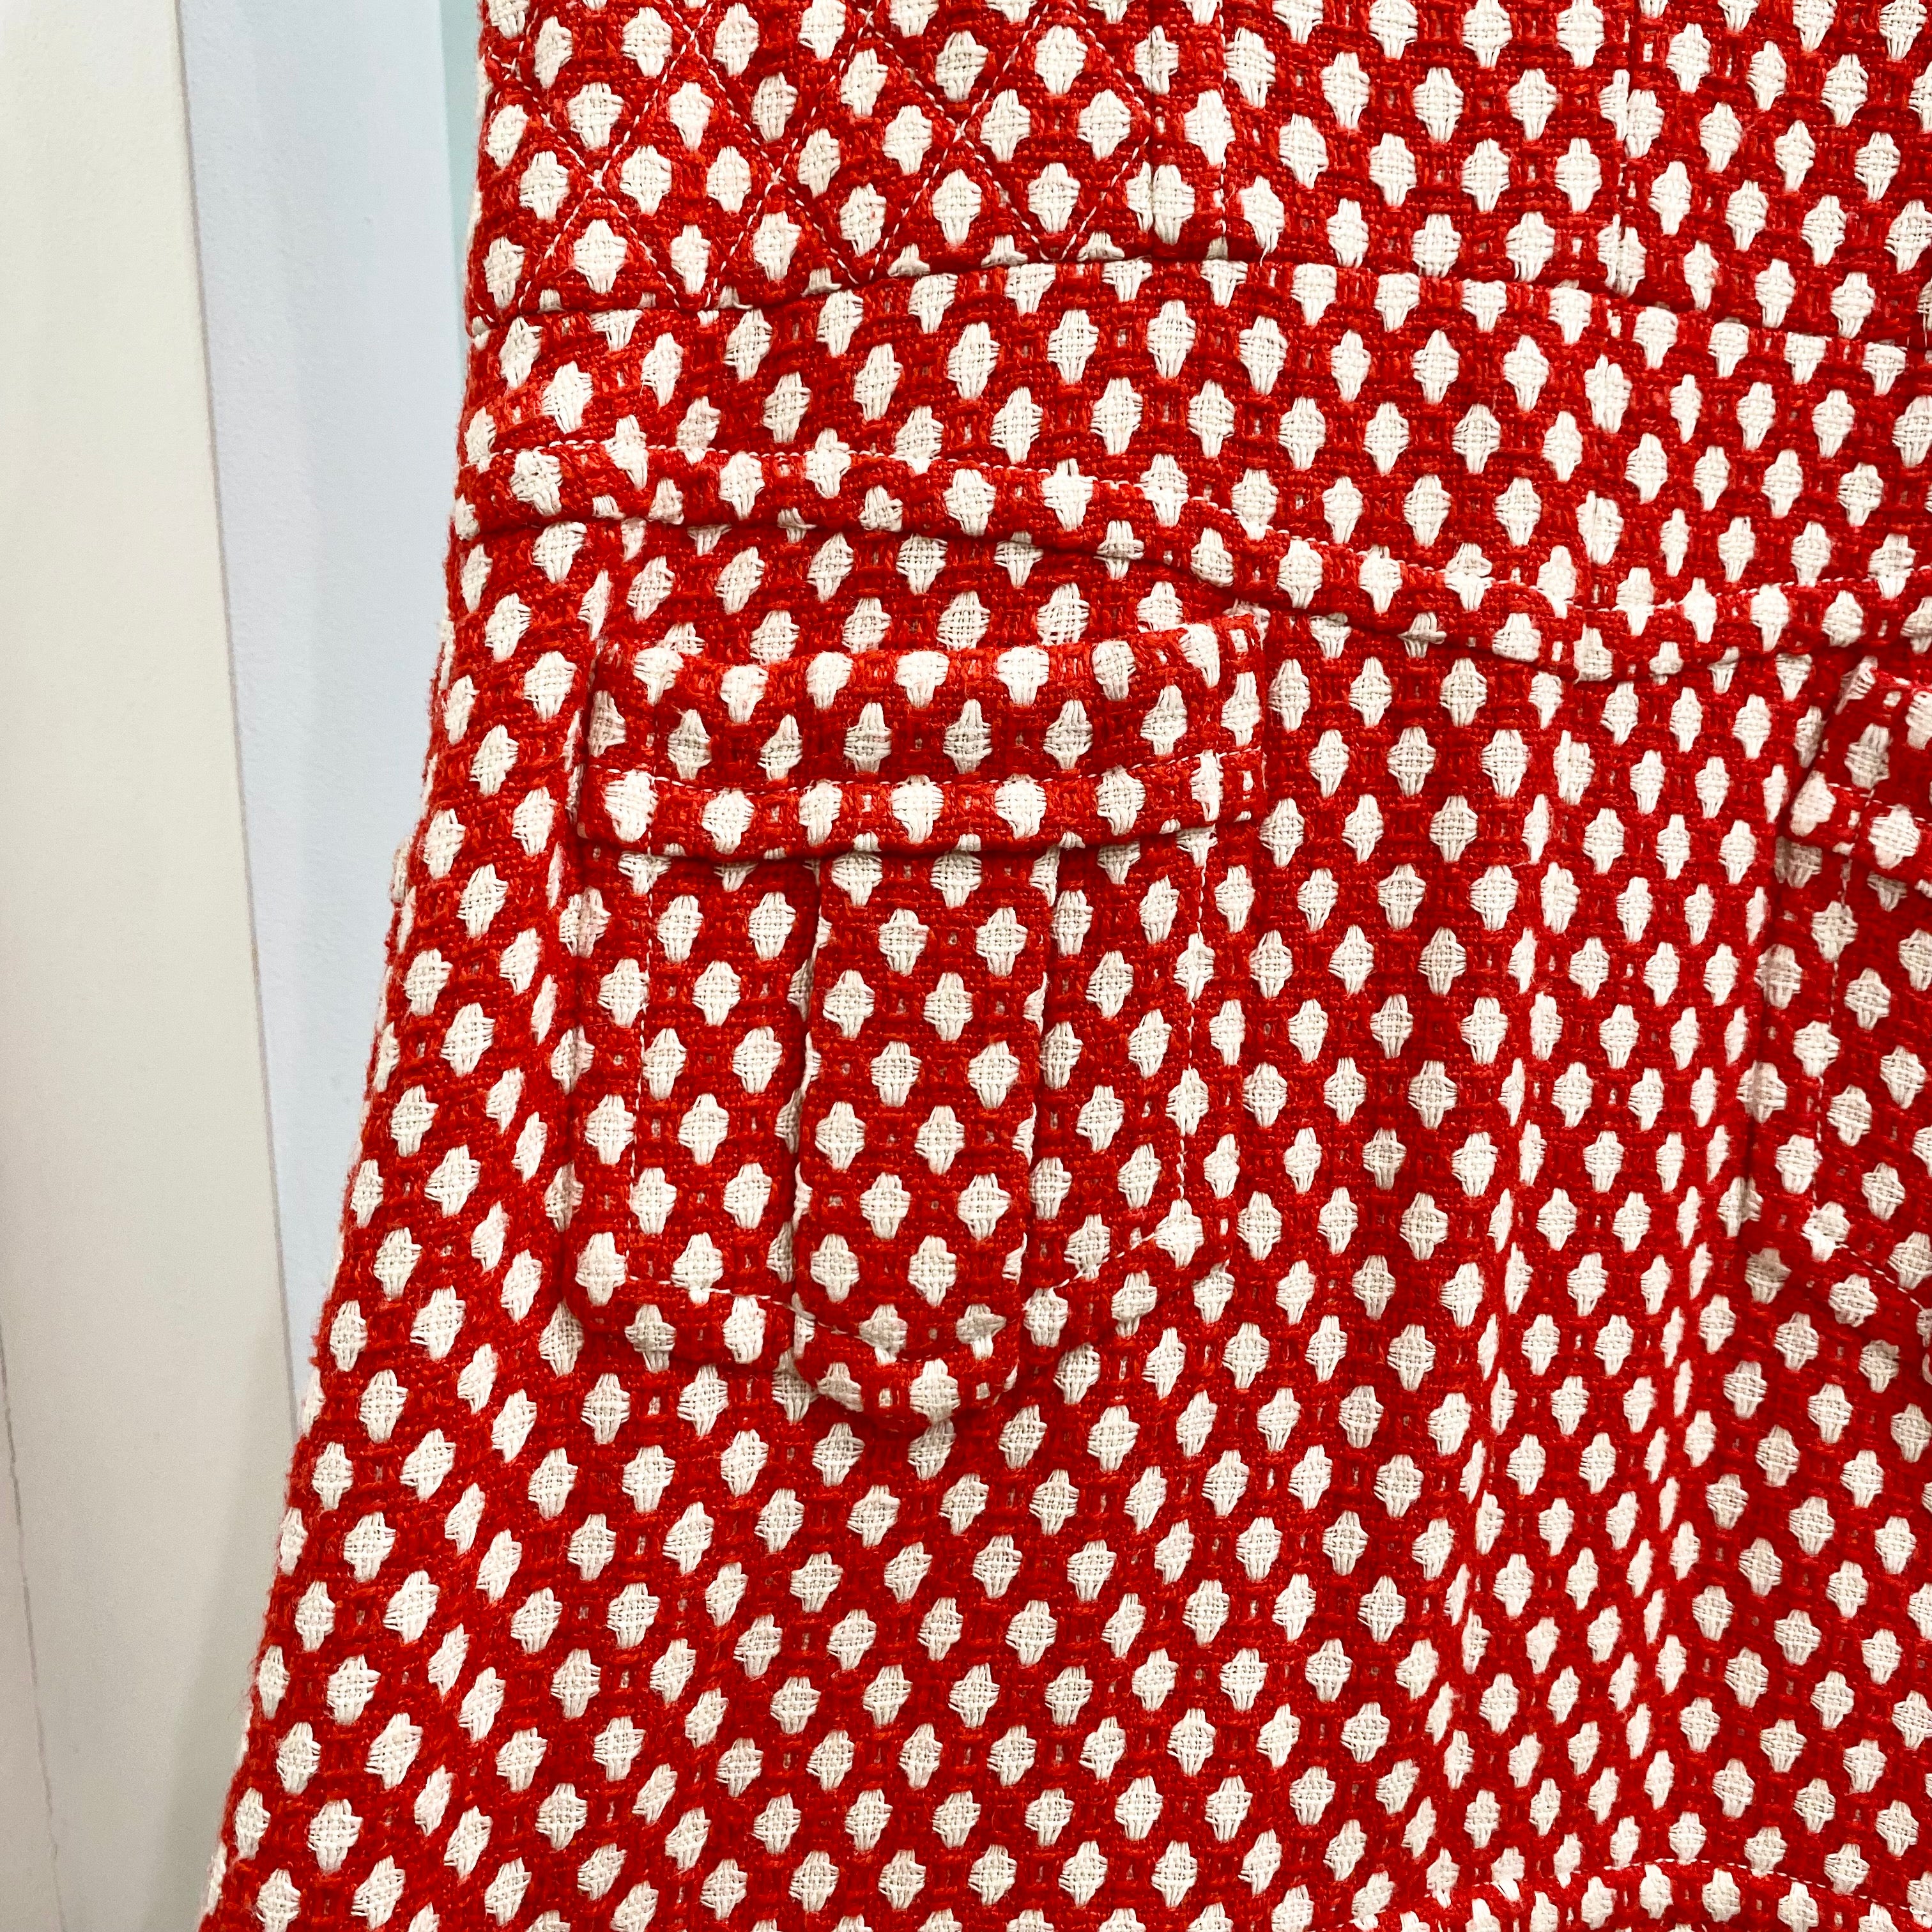 Chanel Red and White Tweed Dress